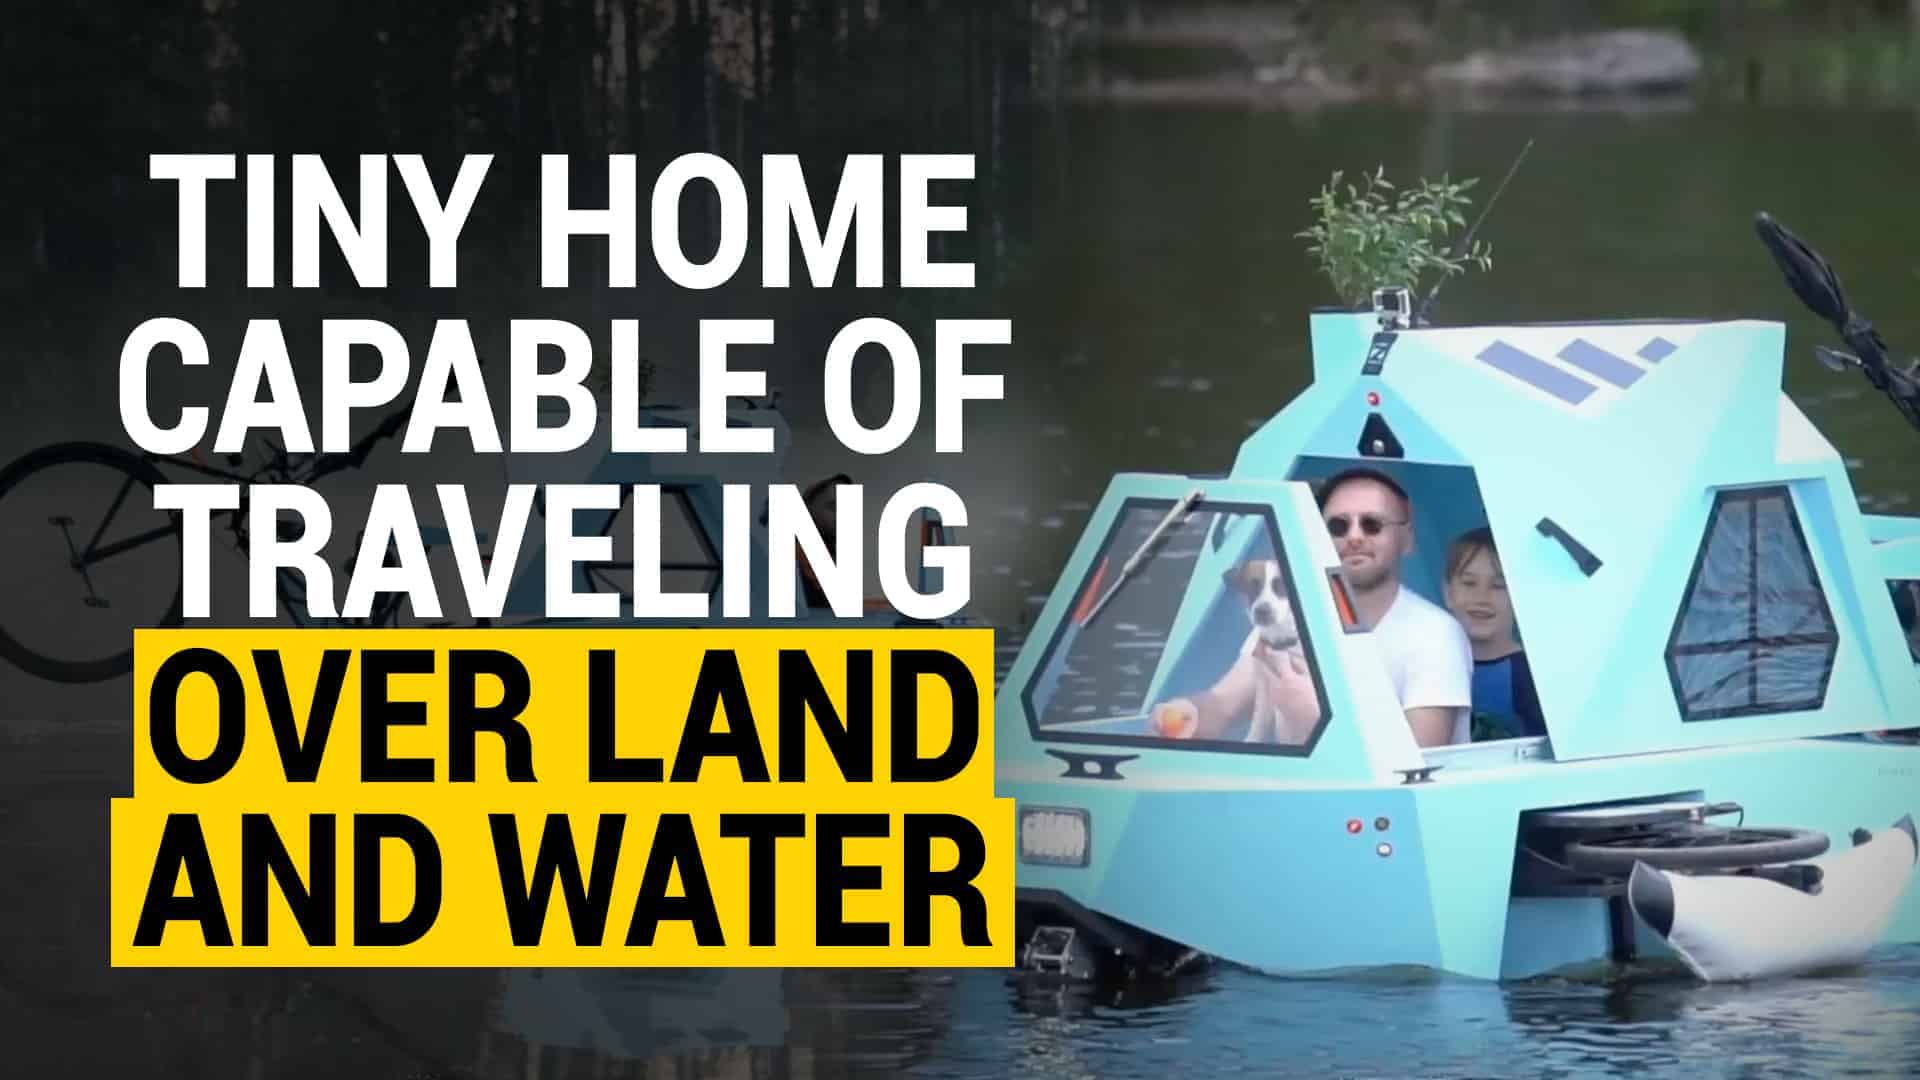 This Tiny Home Can Travel Over Land and Water